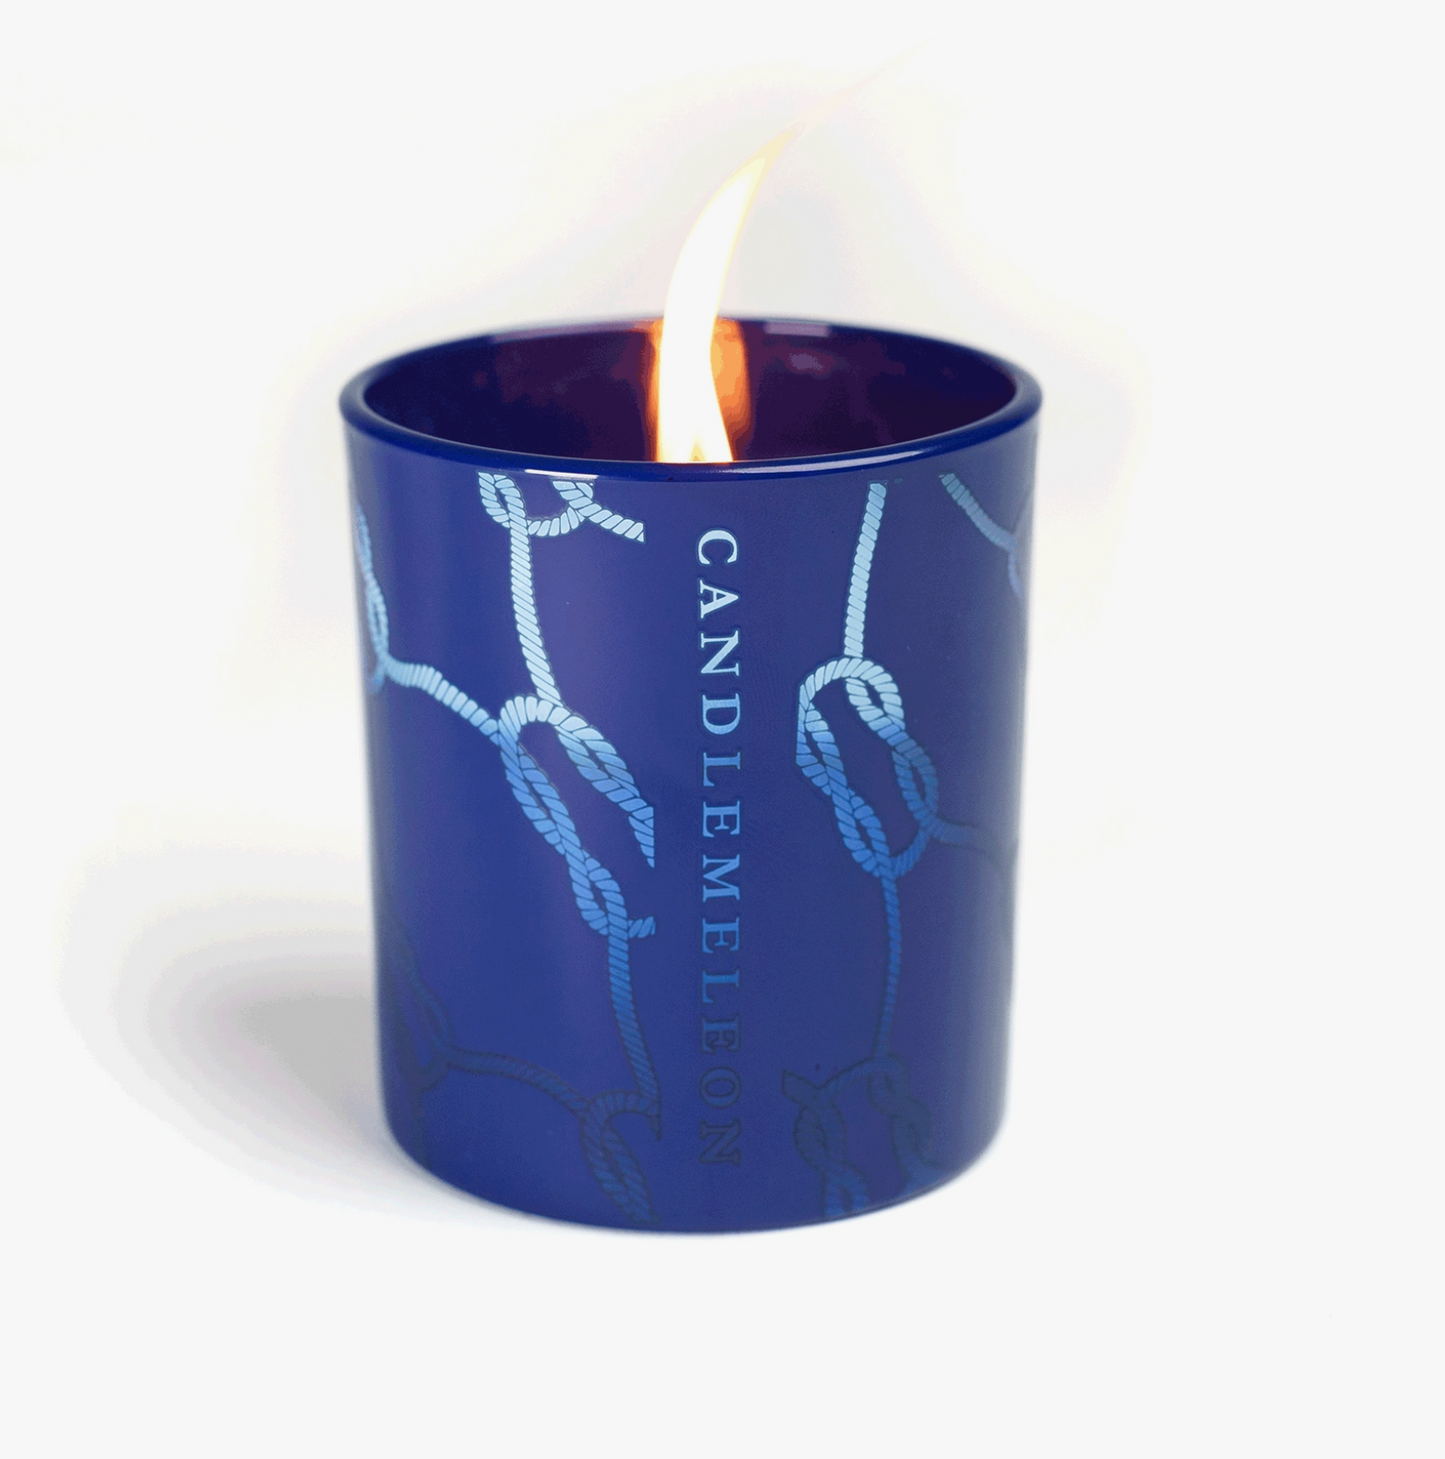 CANDLEMELEON - BISCAY - Eucalyptus, Patchouli & Water Lily Candle